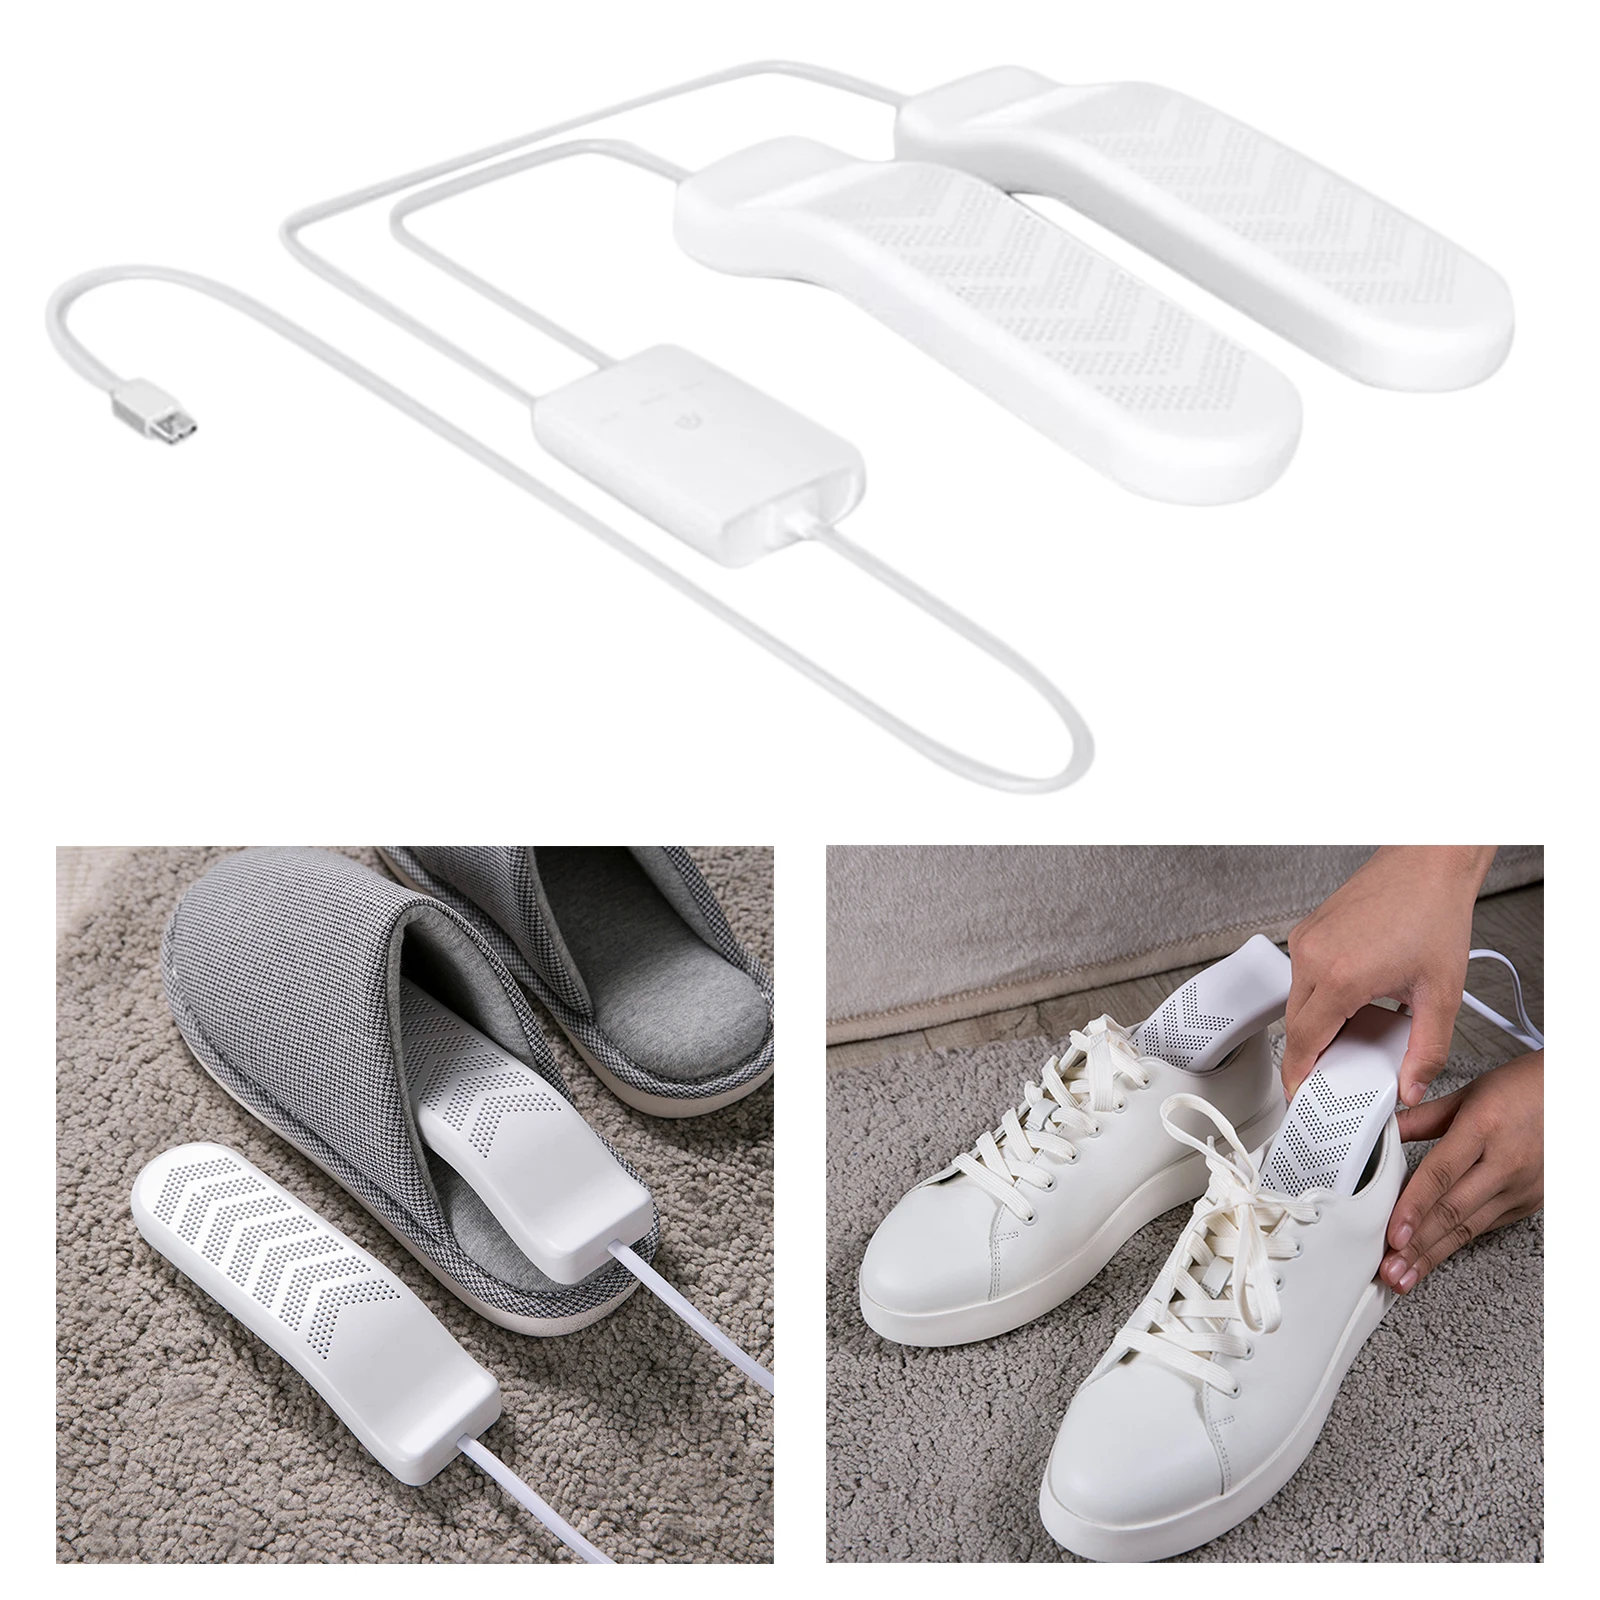 Household USB Electric Boot Dryer Shoe Dryer with Timer Deodorizate 5V White